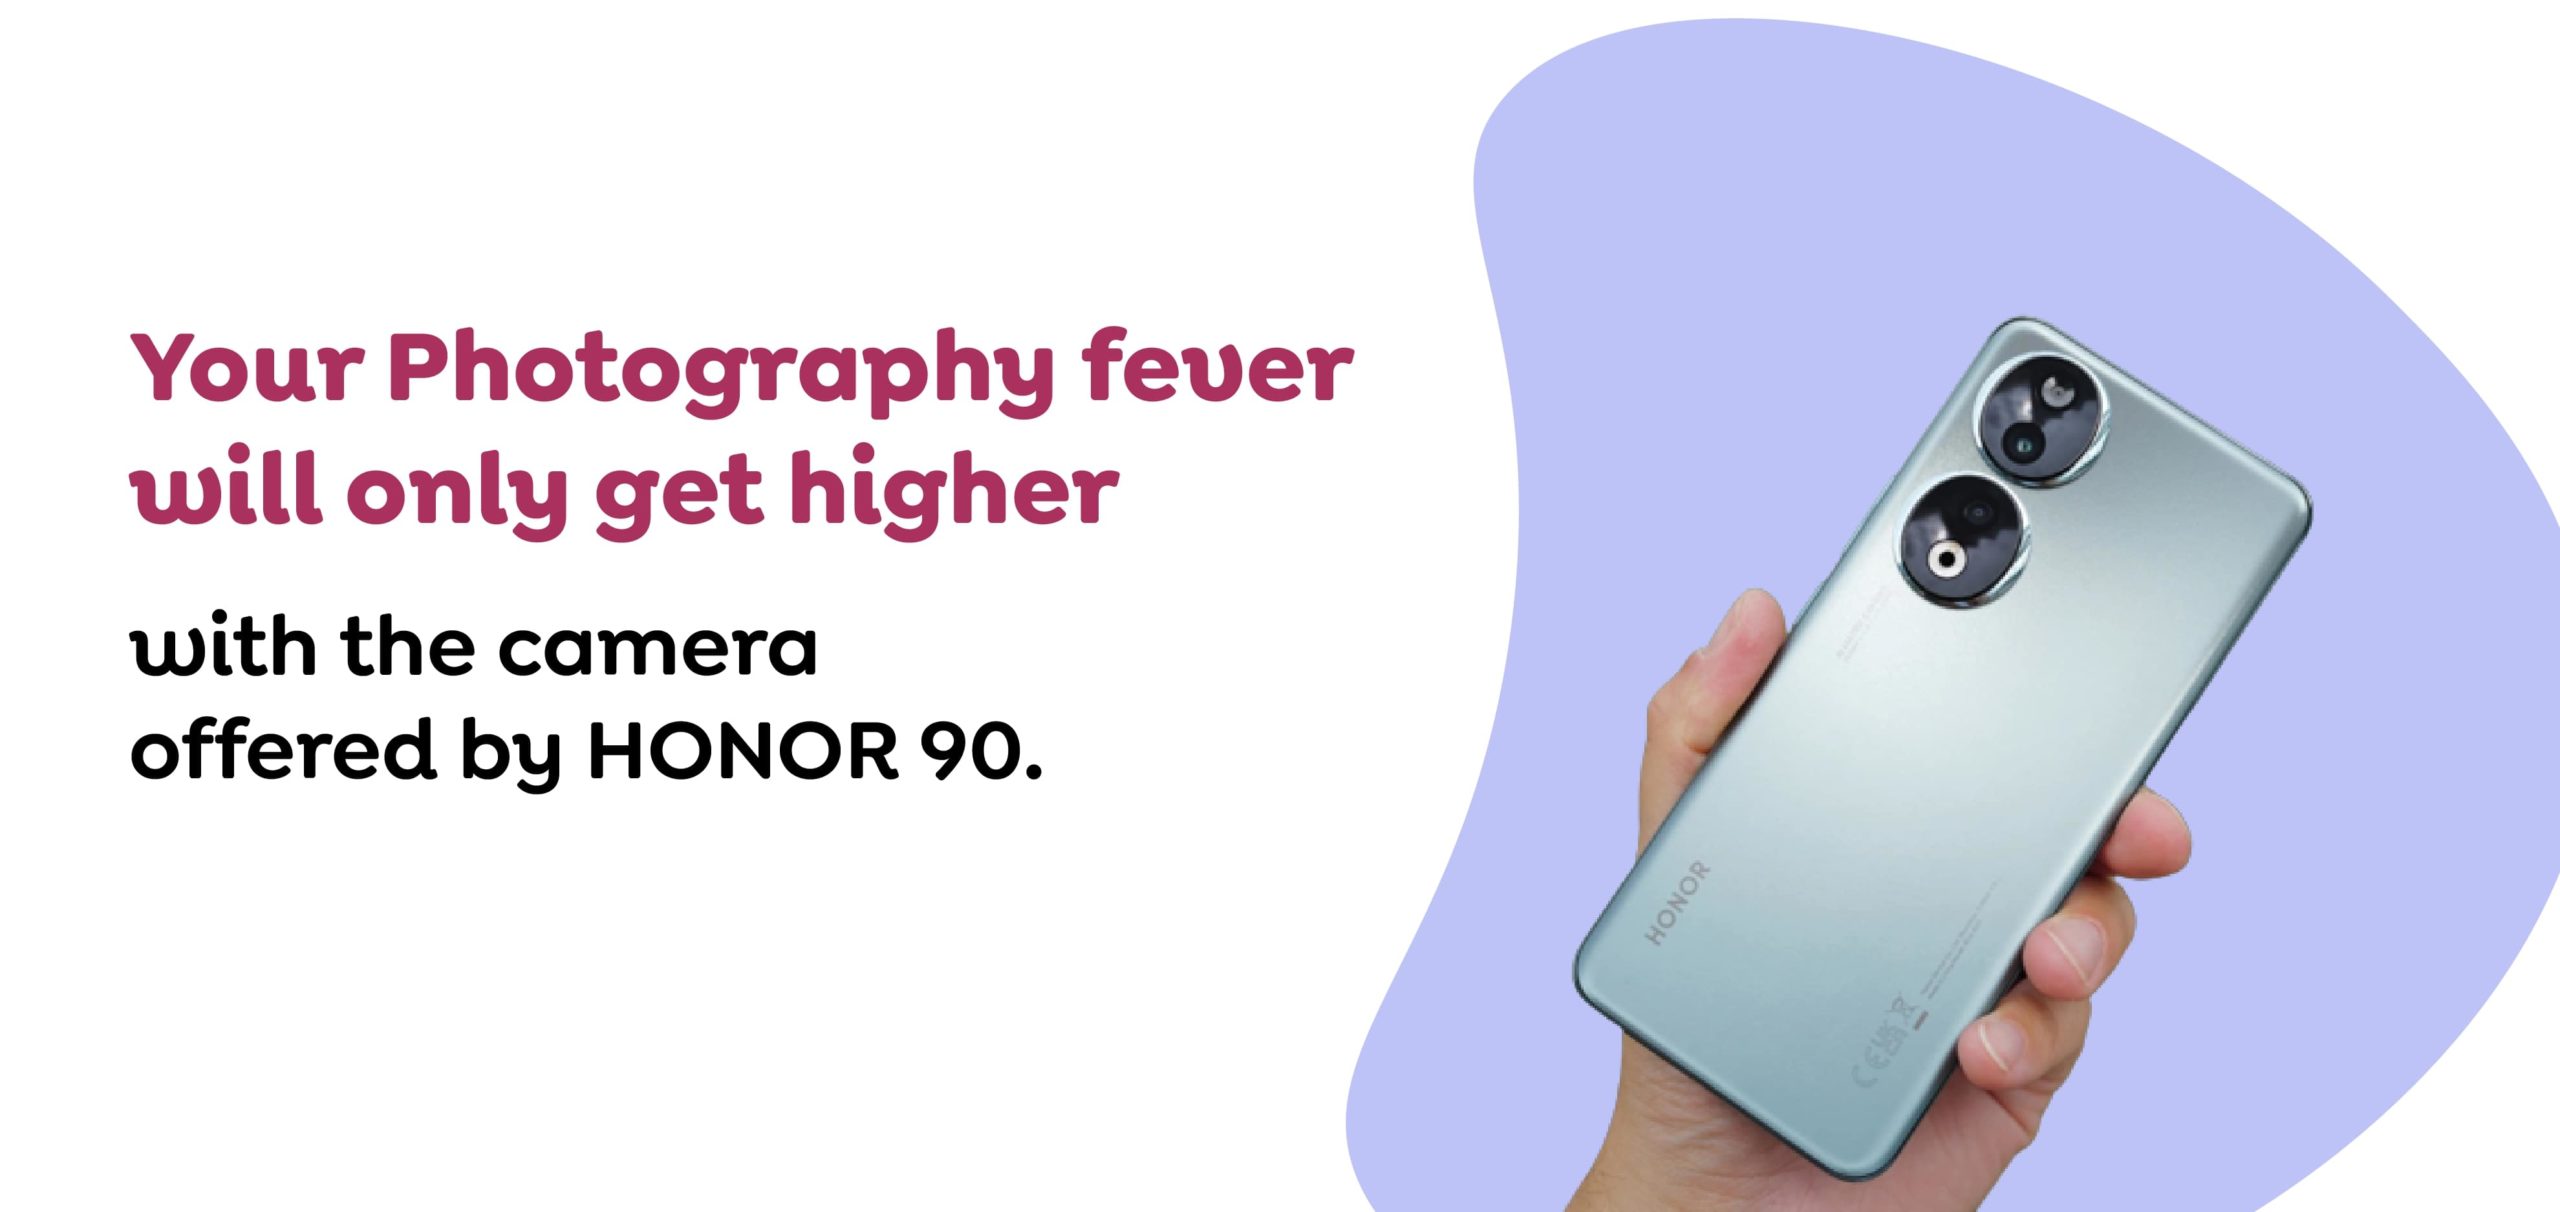 Your Photography fever will only get higher with the camera offered by HONOR 90